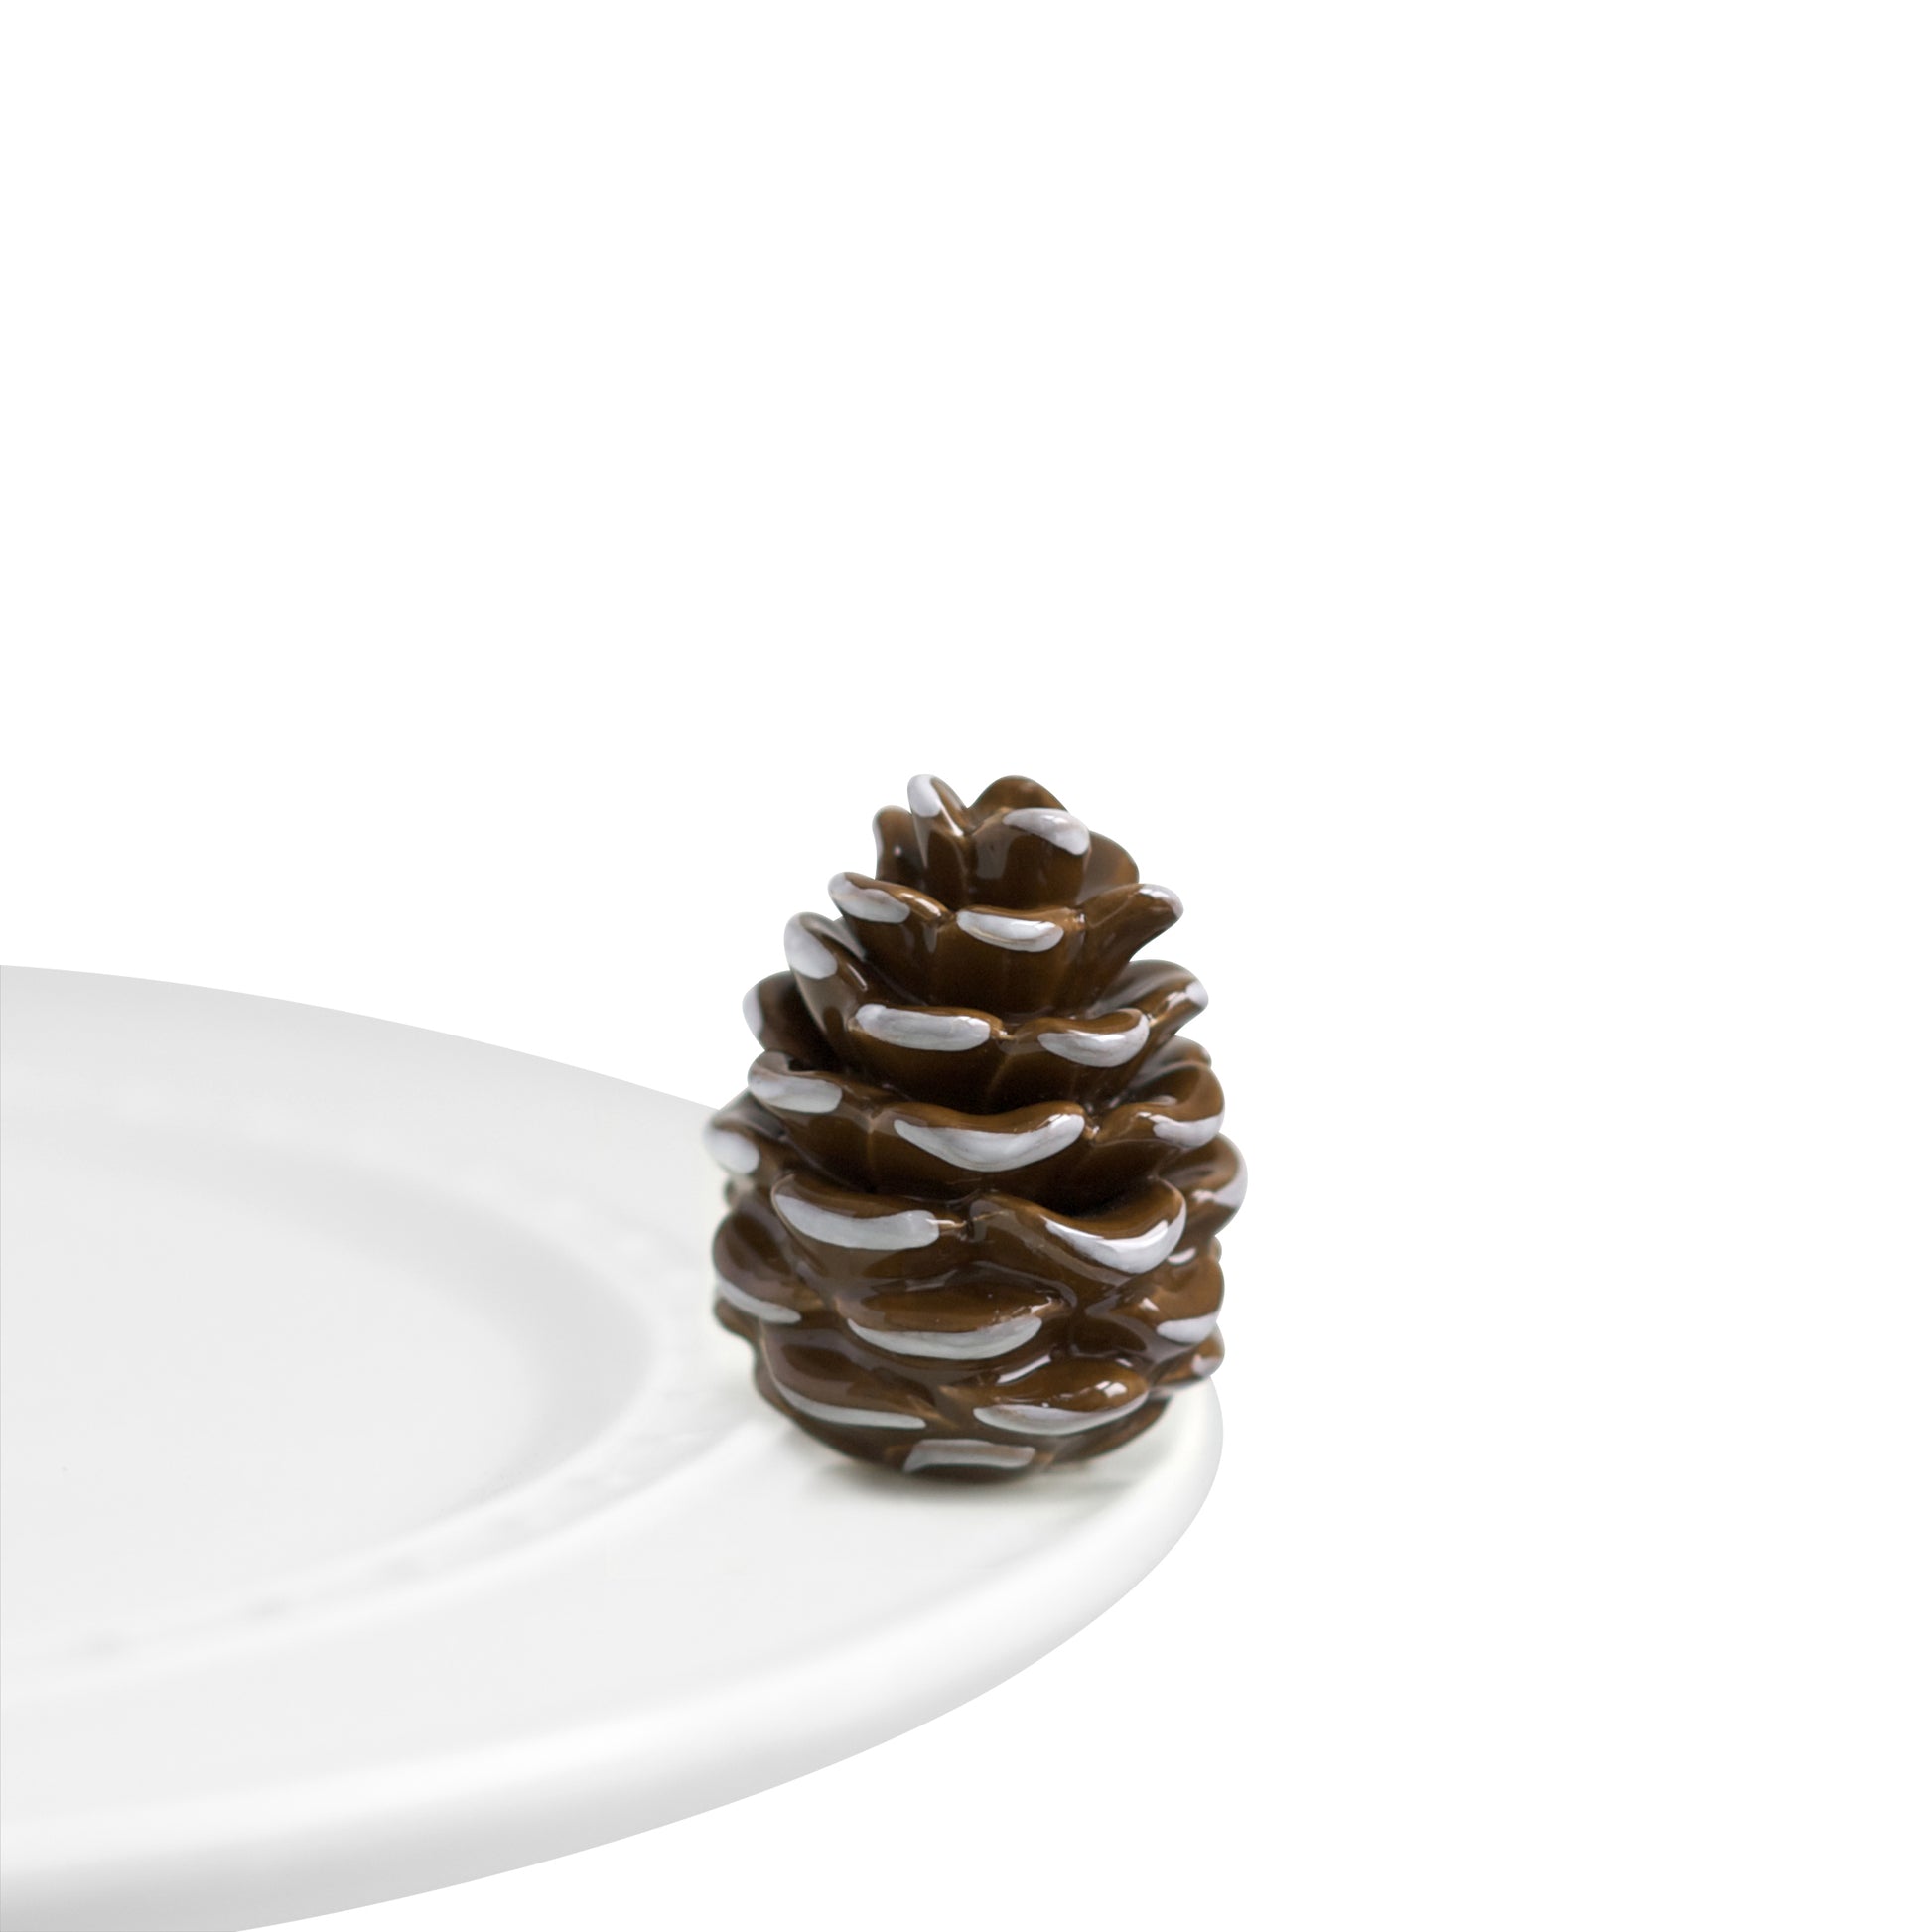 Nora Fleming Pretty Pinecone mini. Use to celebrate the Winter Solstice or anytime during winter months. Shop at The Painted Cottage in Edgewater MD.